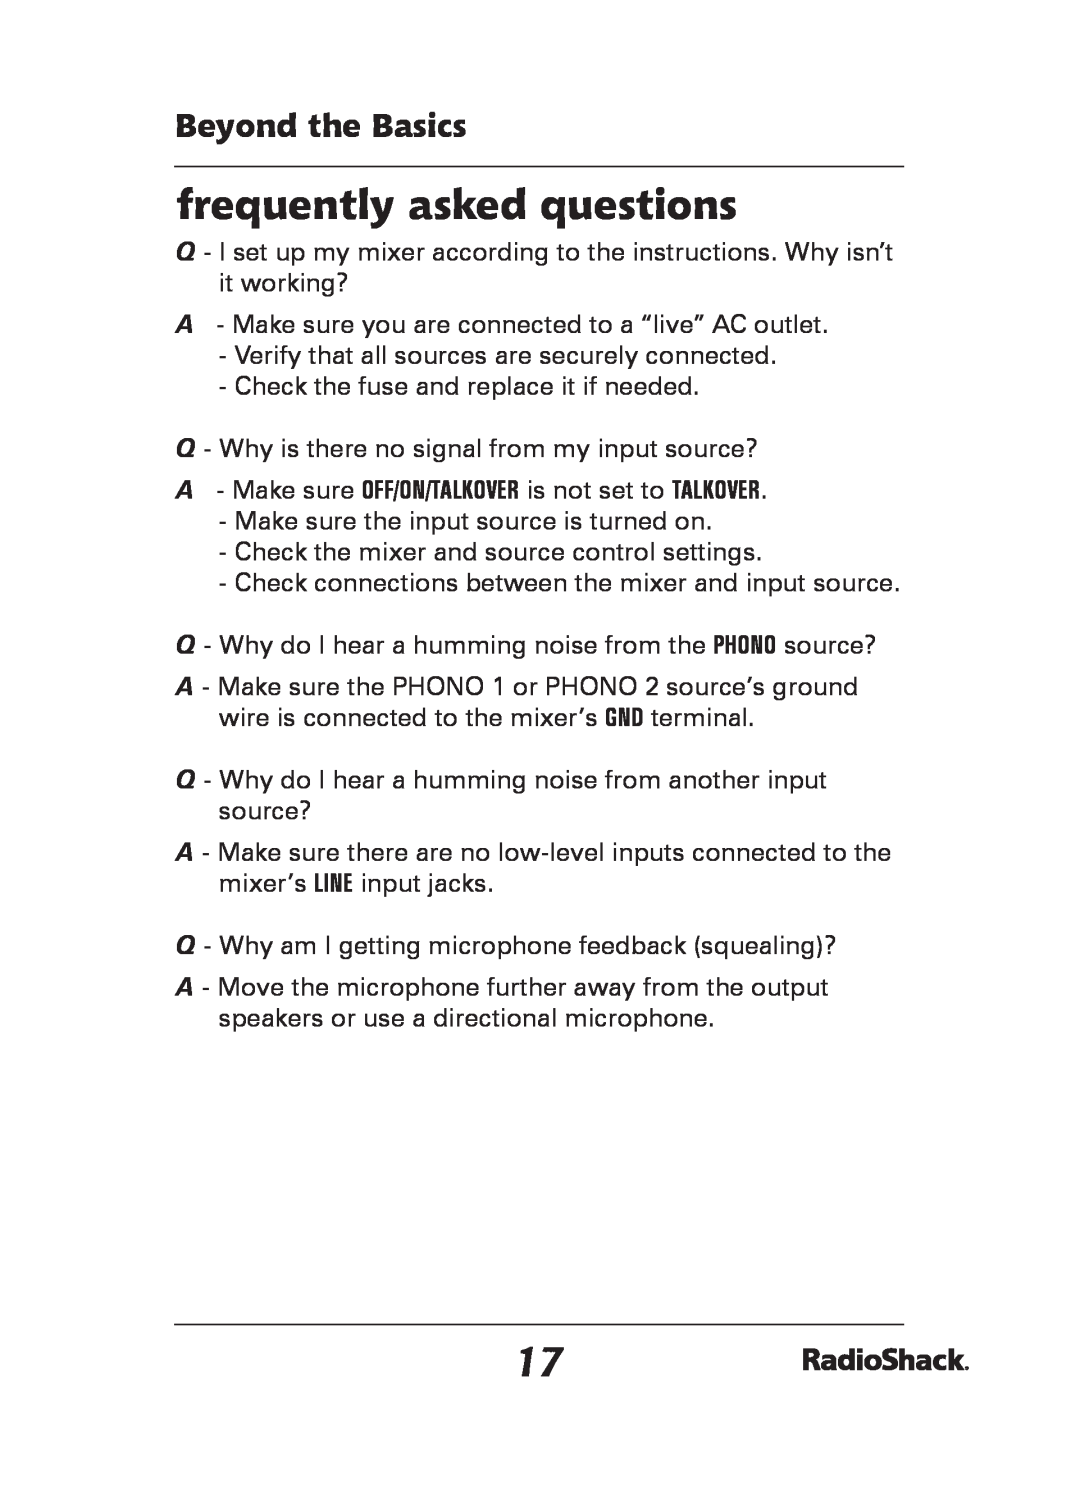 Radio Shack 32-2057 quick start frequently asked questions, Beyond the Basics 